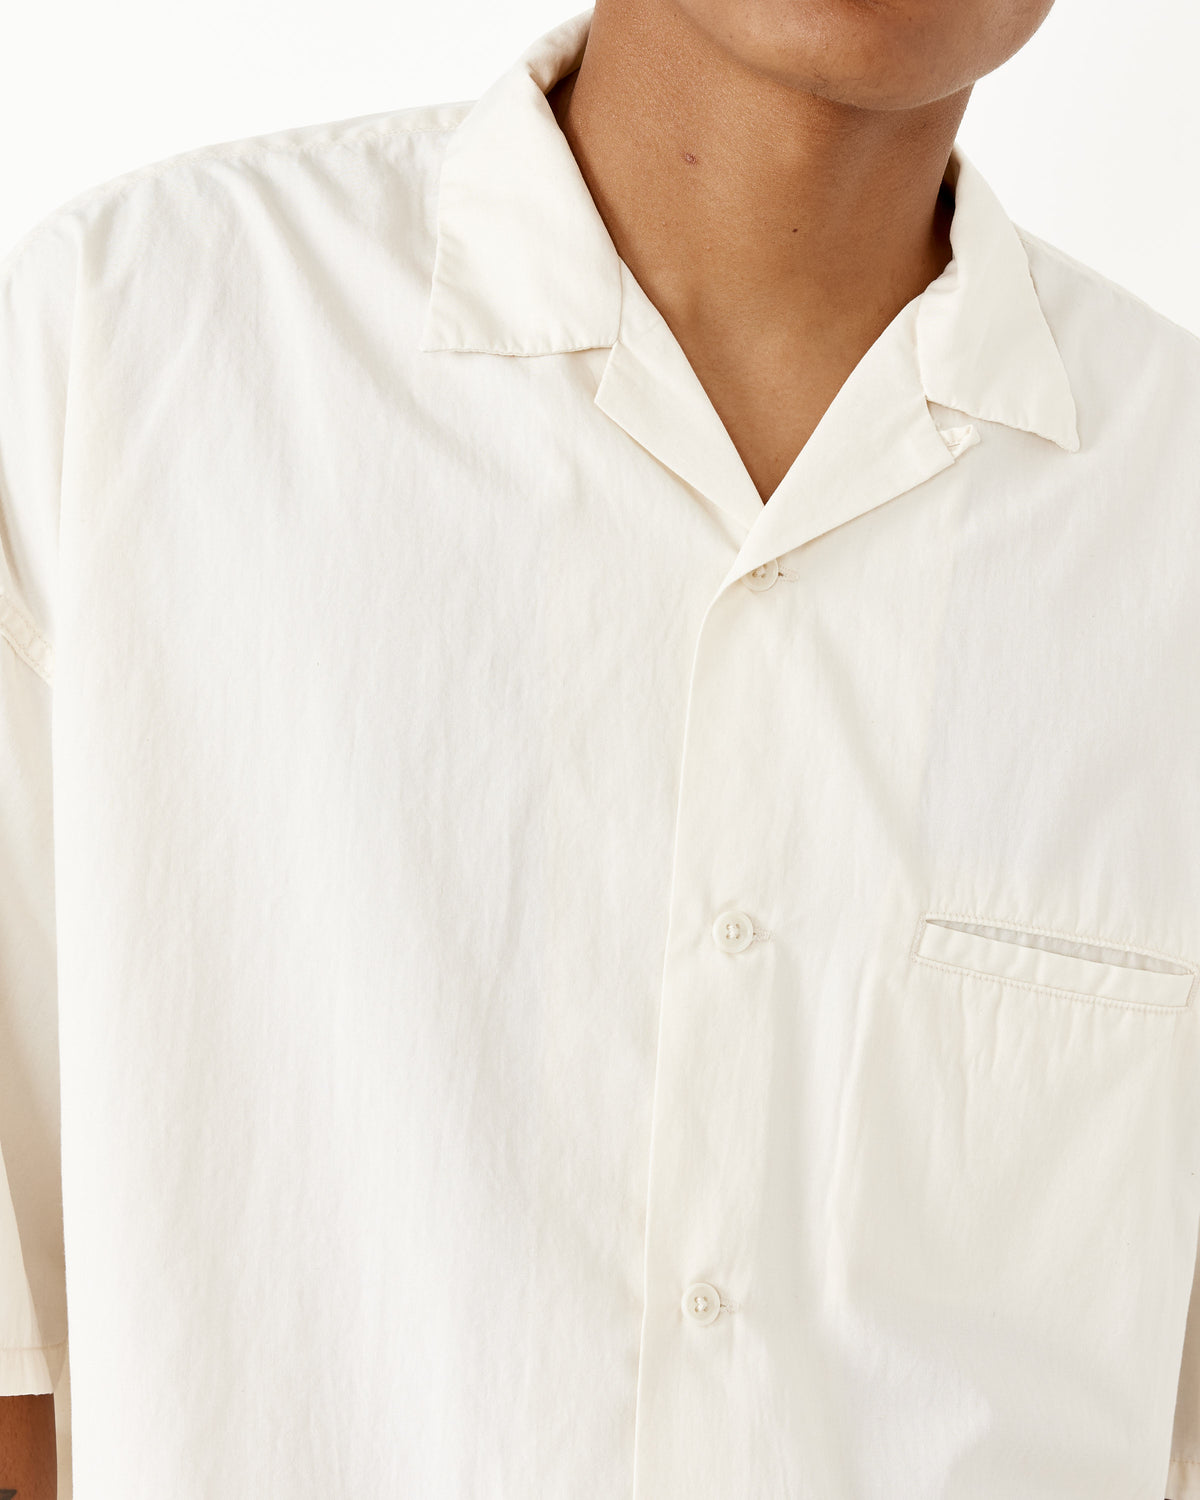 Discover our Exciting Line of Open Collar Wind Shirt Nanamica